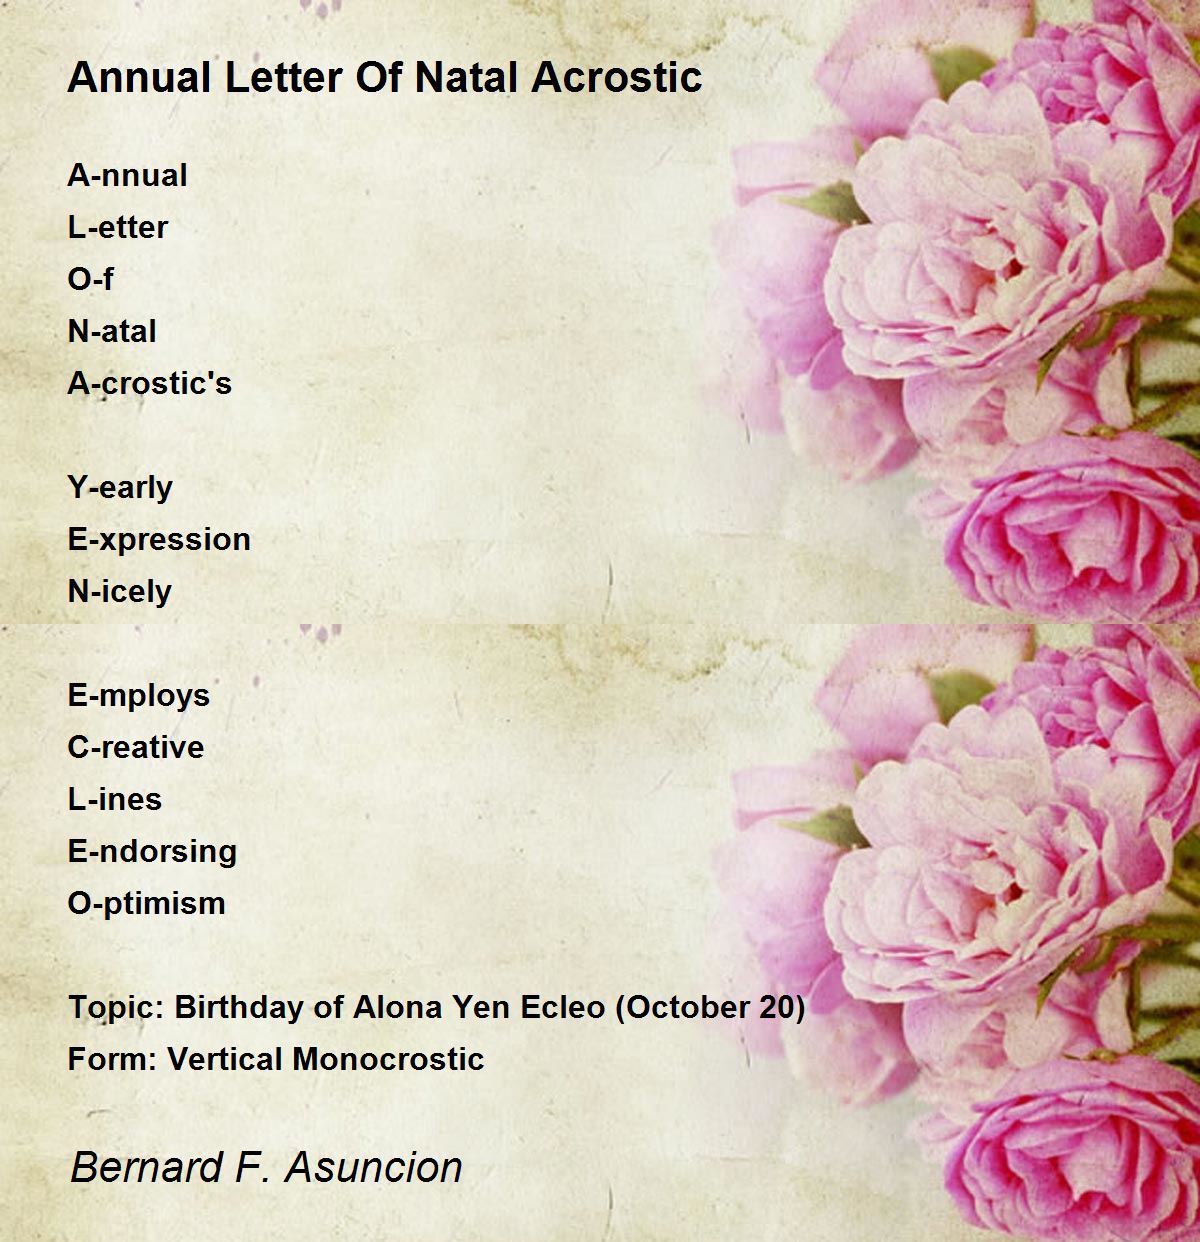 Annual Letter Of Natal Acrostic - Annual Letter Of Natal Acrostic Poem by  Bernard F. Asuncion